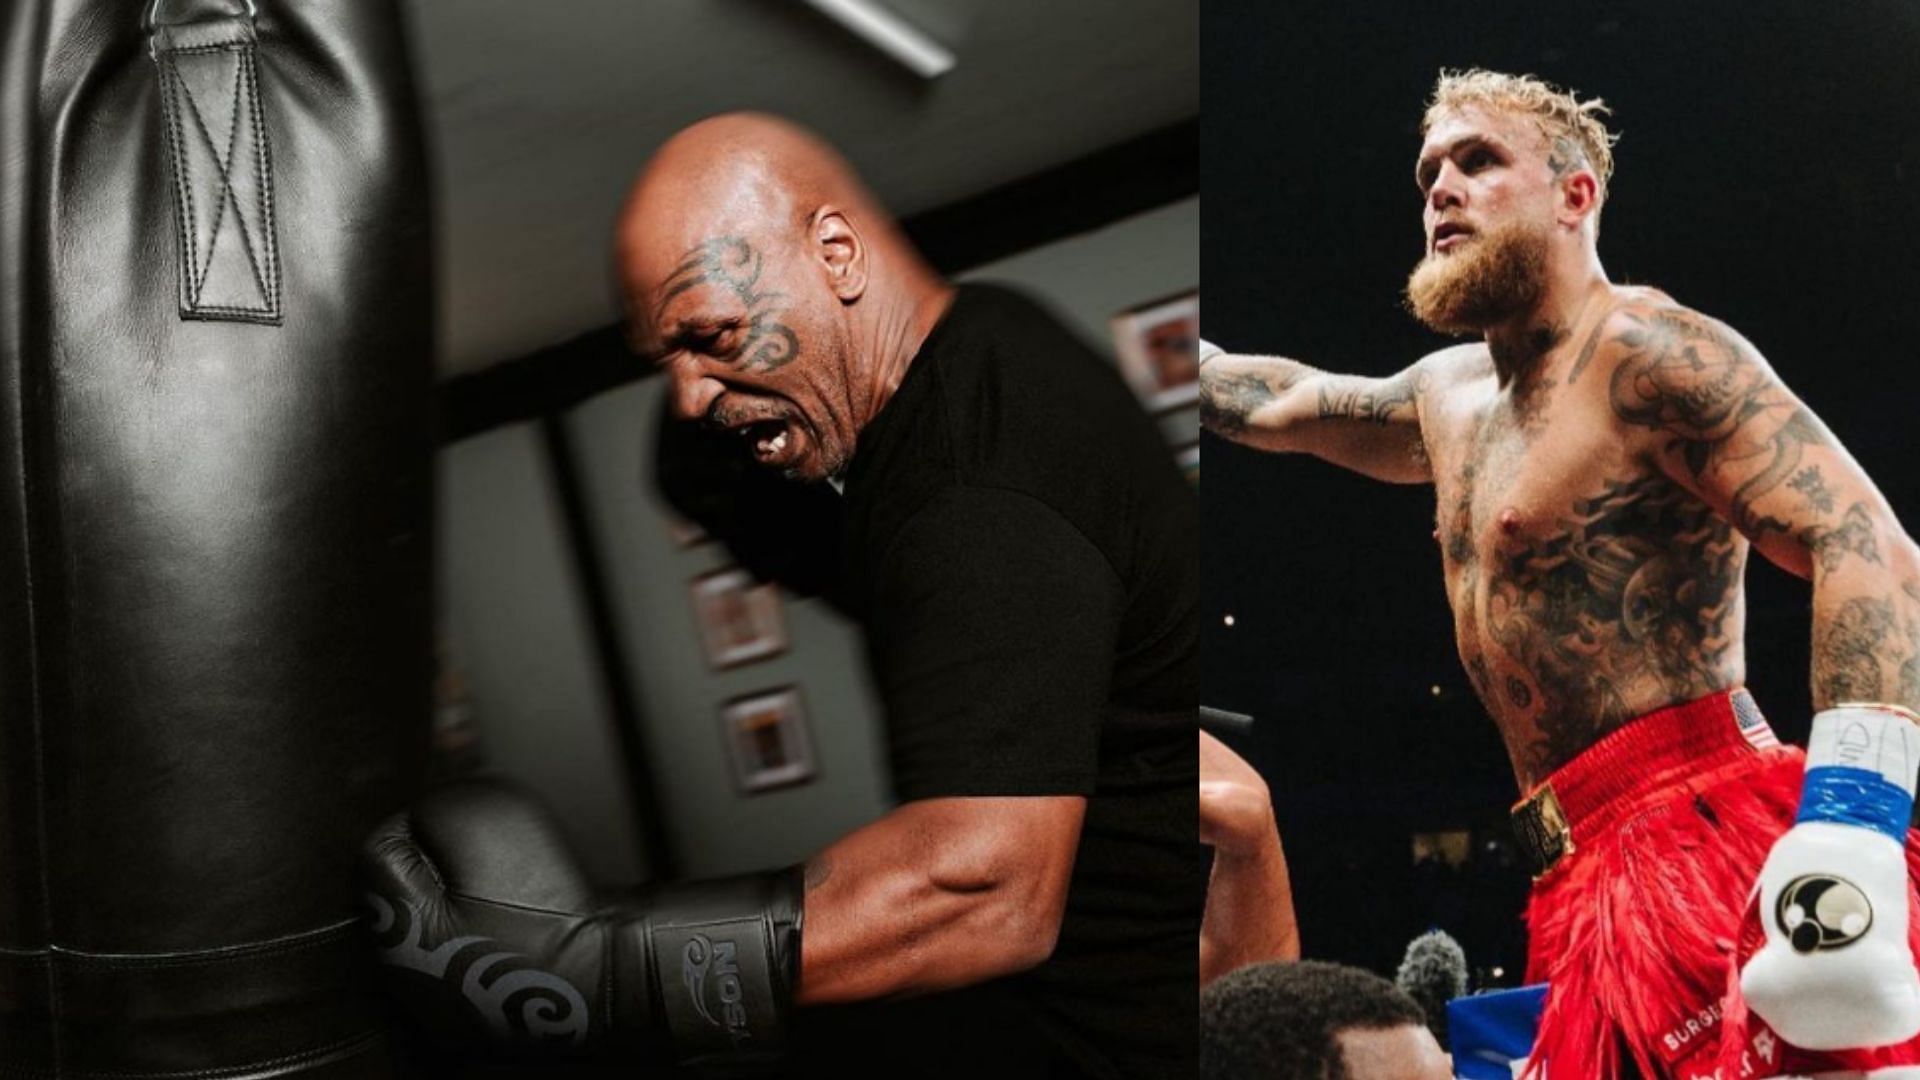 Prior to facing Jake Paul (right). Mike Tyson (left) once detailed how sparring left him bedridden for a week [Images courtesy of @miketyson &amp; @jakepaul on Instagram]